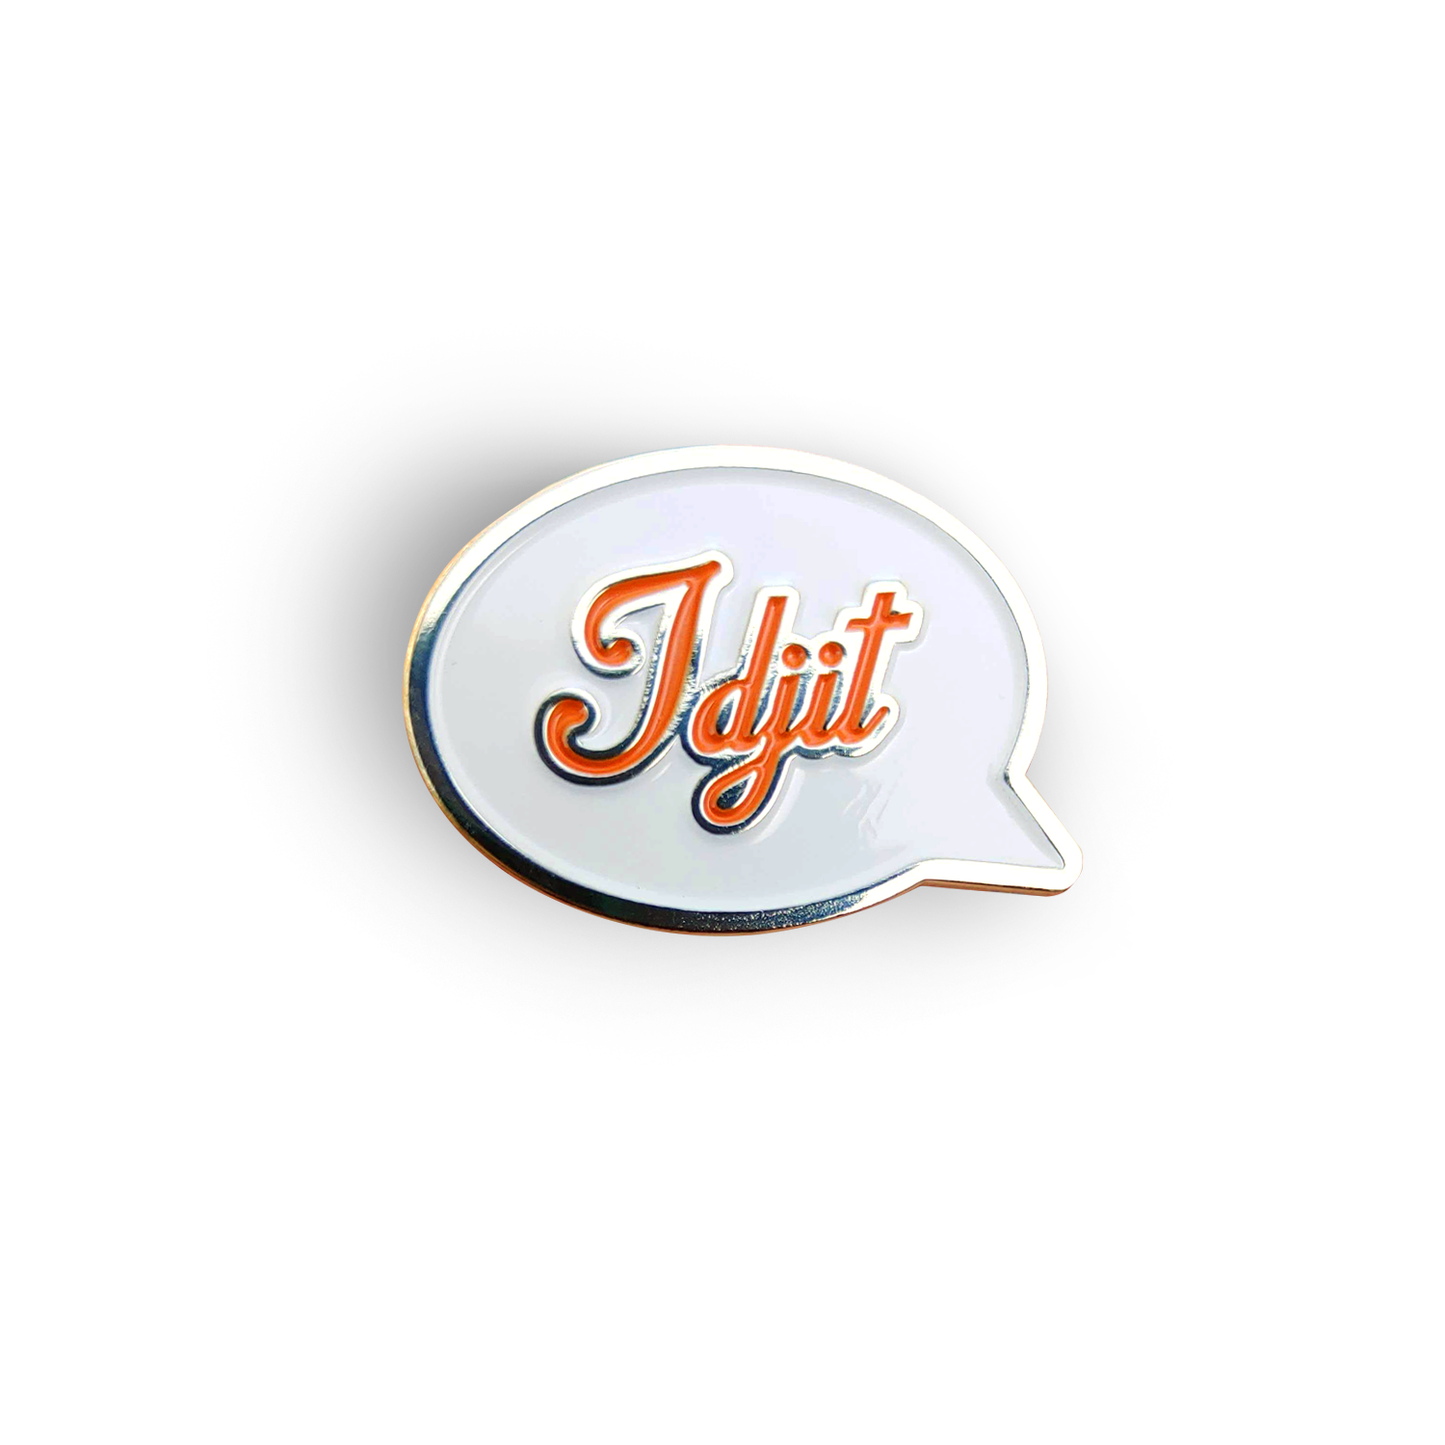 A silver pin with a white front in the shape of a speech bubble. The word "Idjit" is written in orange script font.